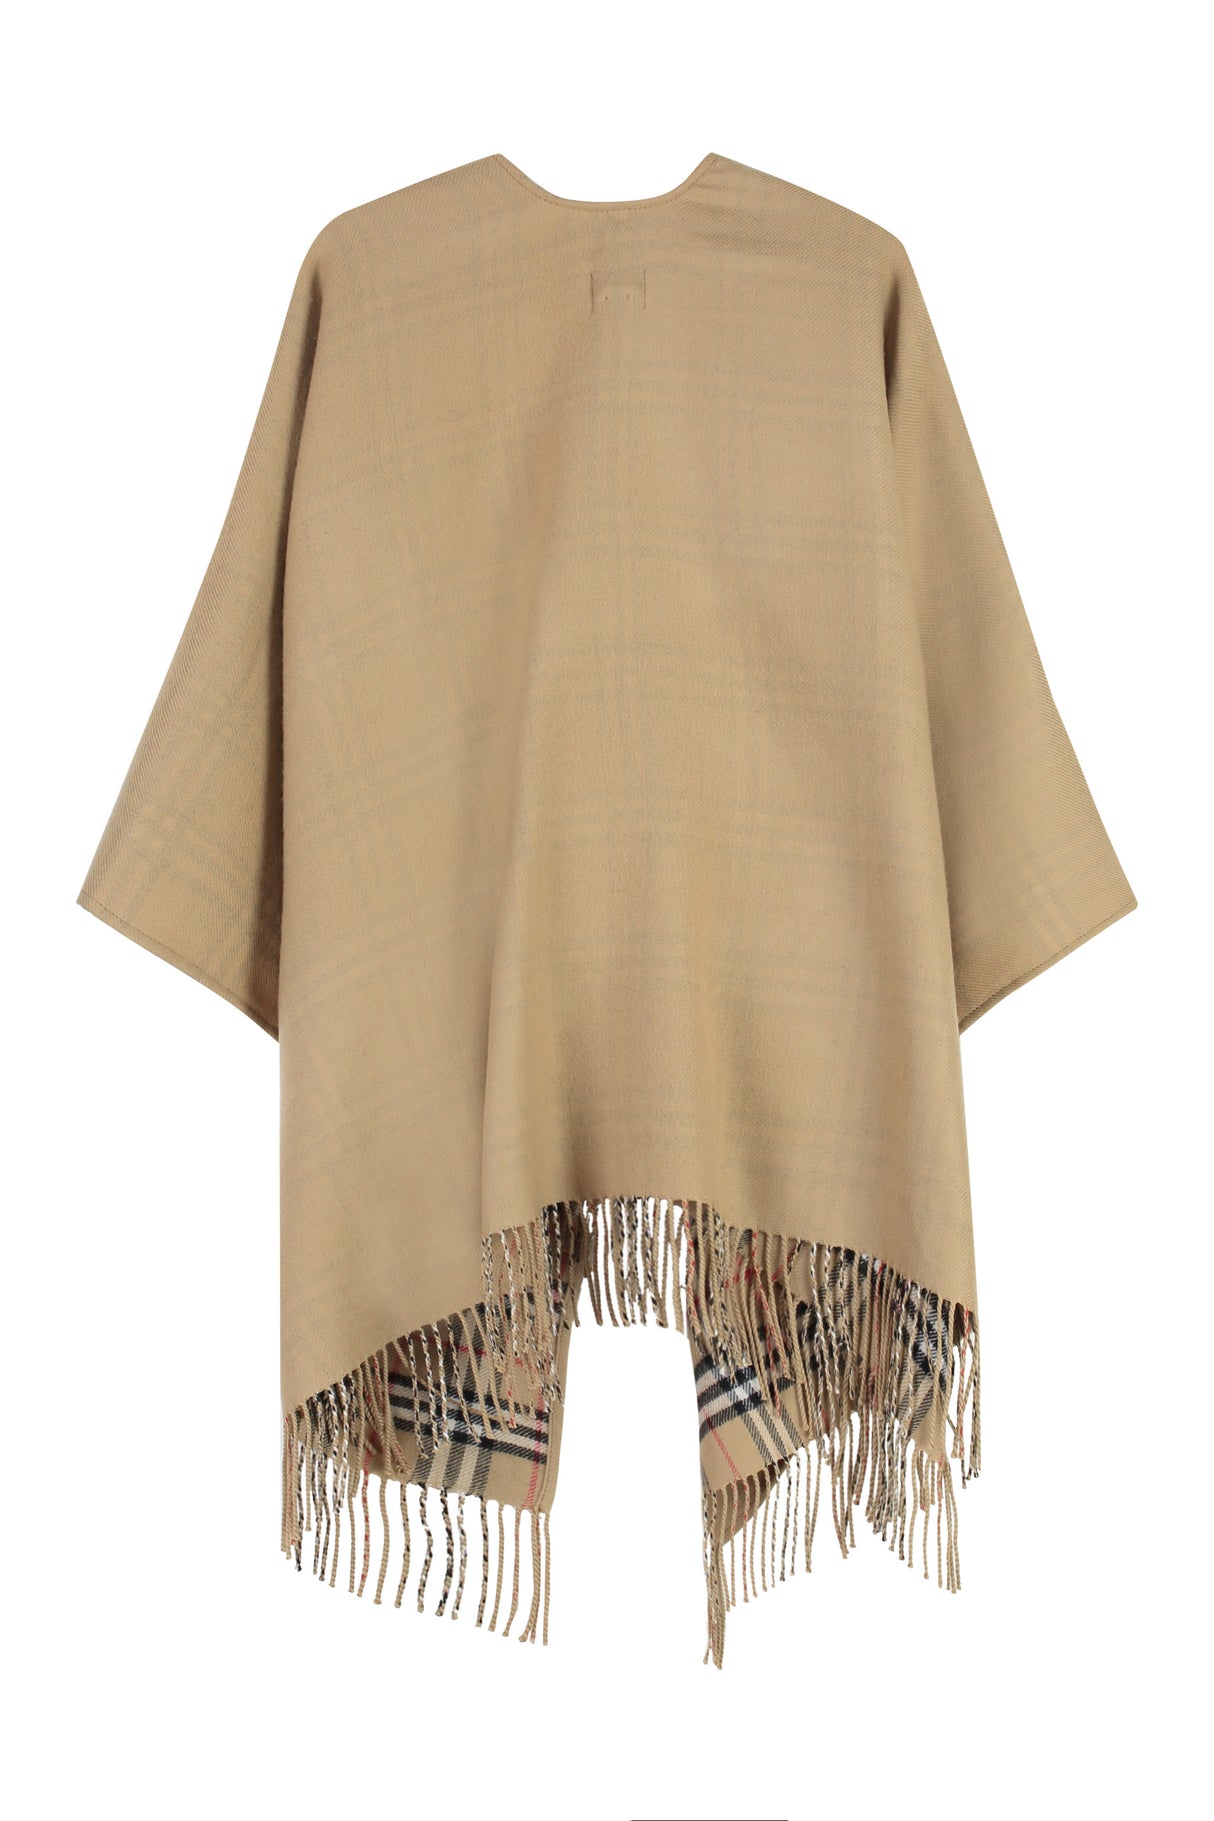 BURBERRY Reversible Check Wool Cape for Women - Beige